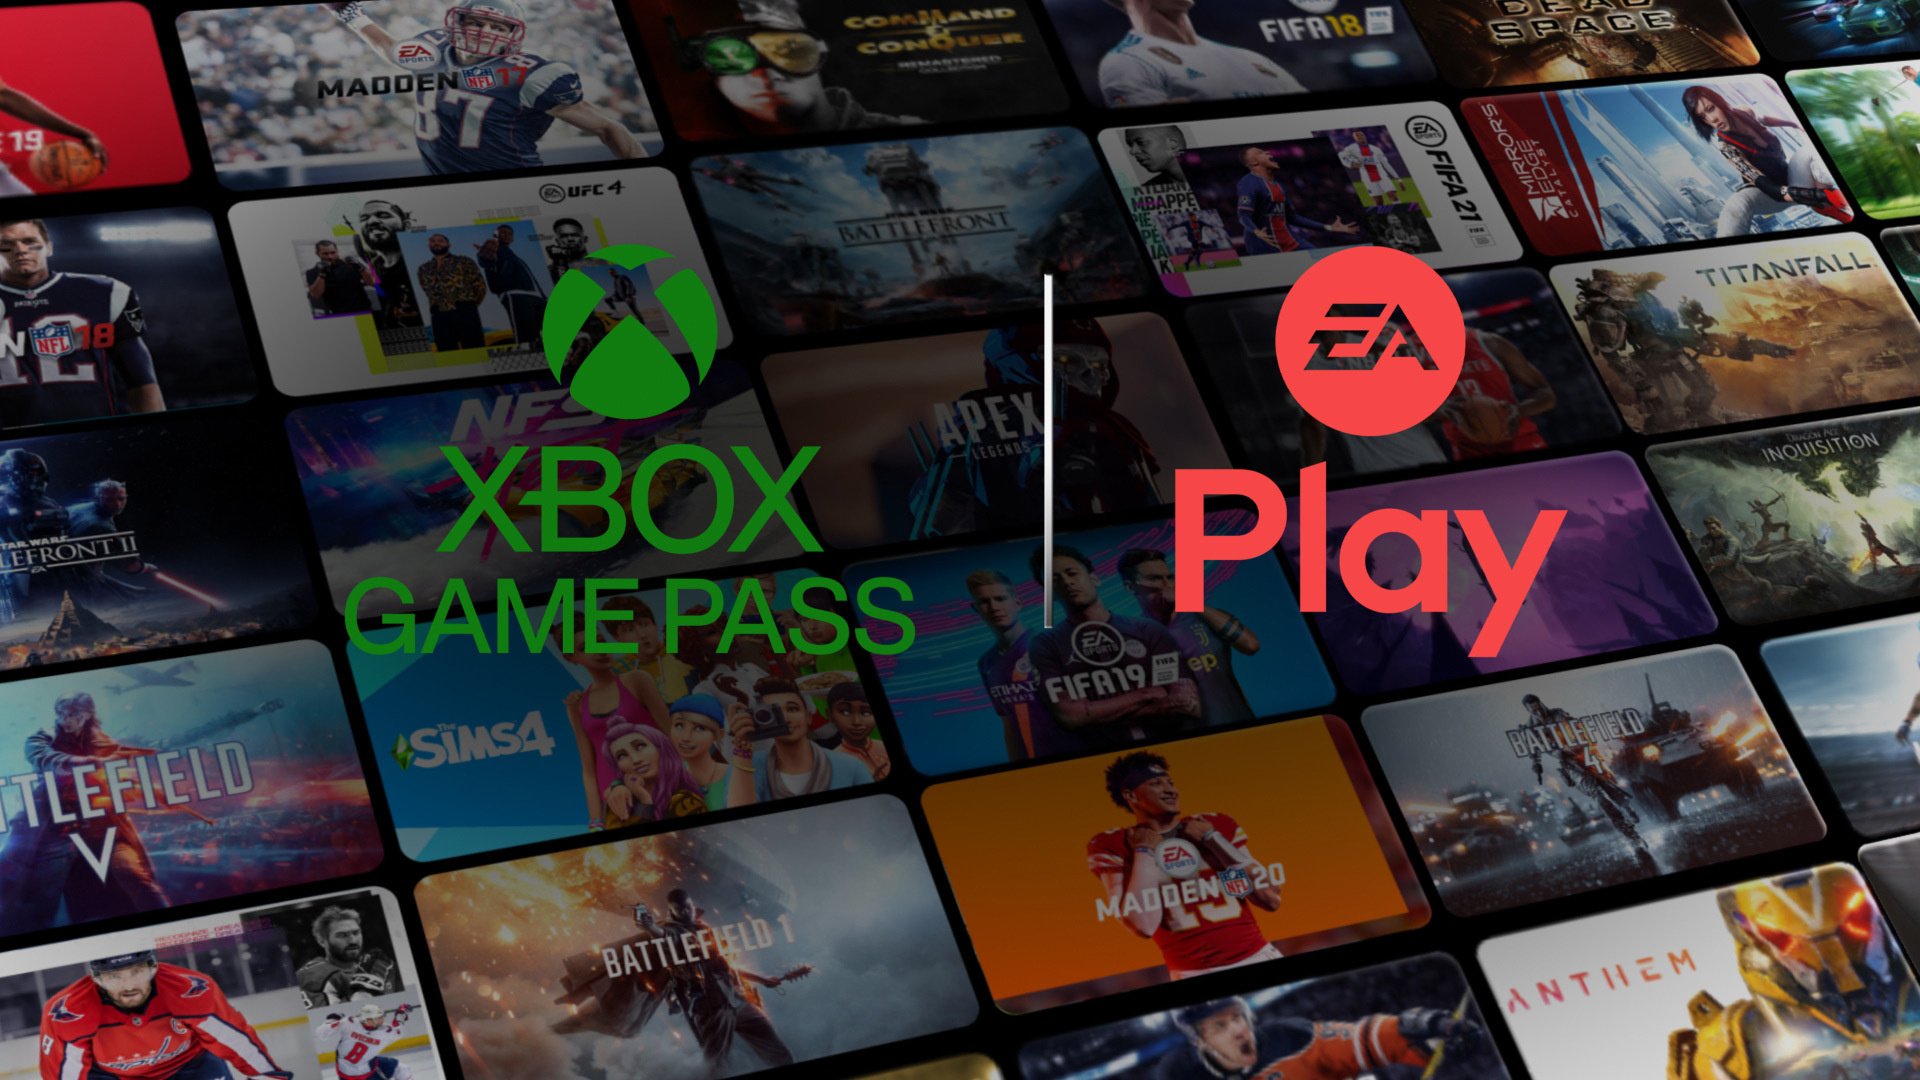 With 13 million subscribers, EA is happy to partner with Xbox |  Xbox One